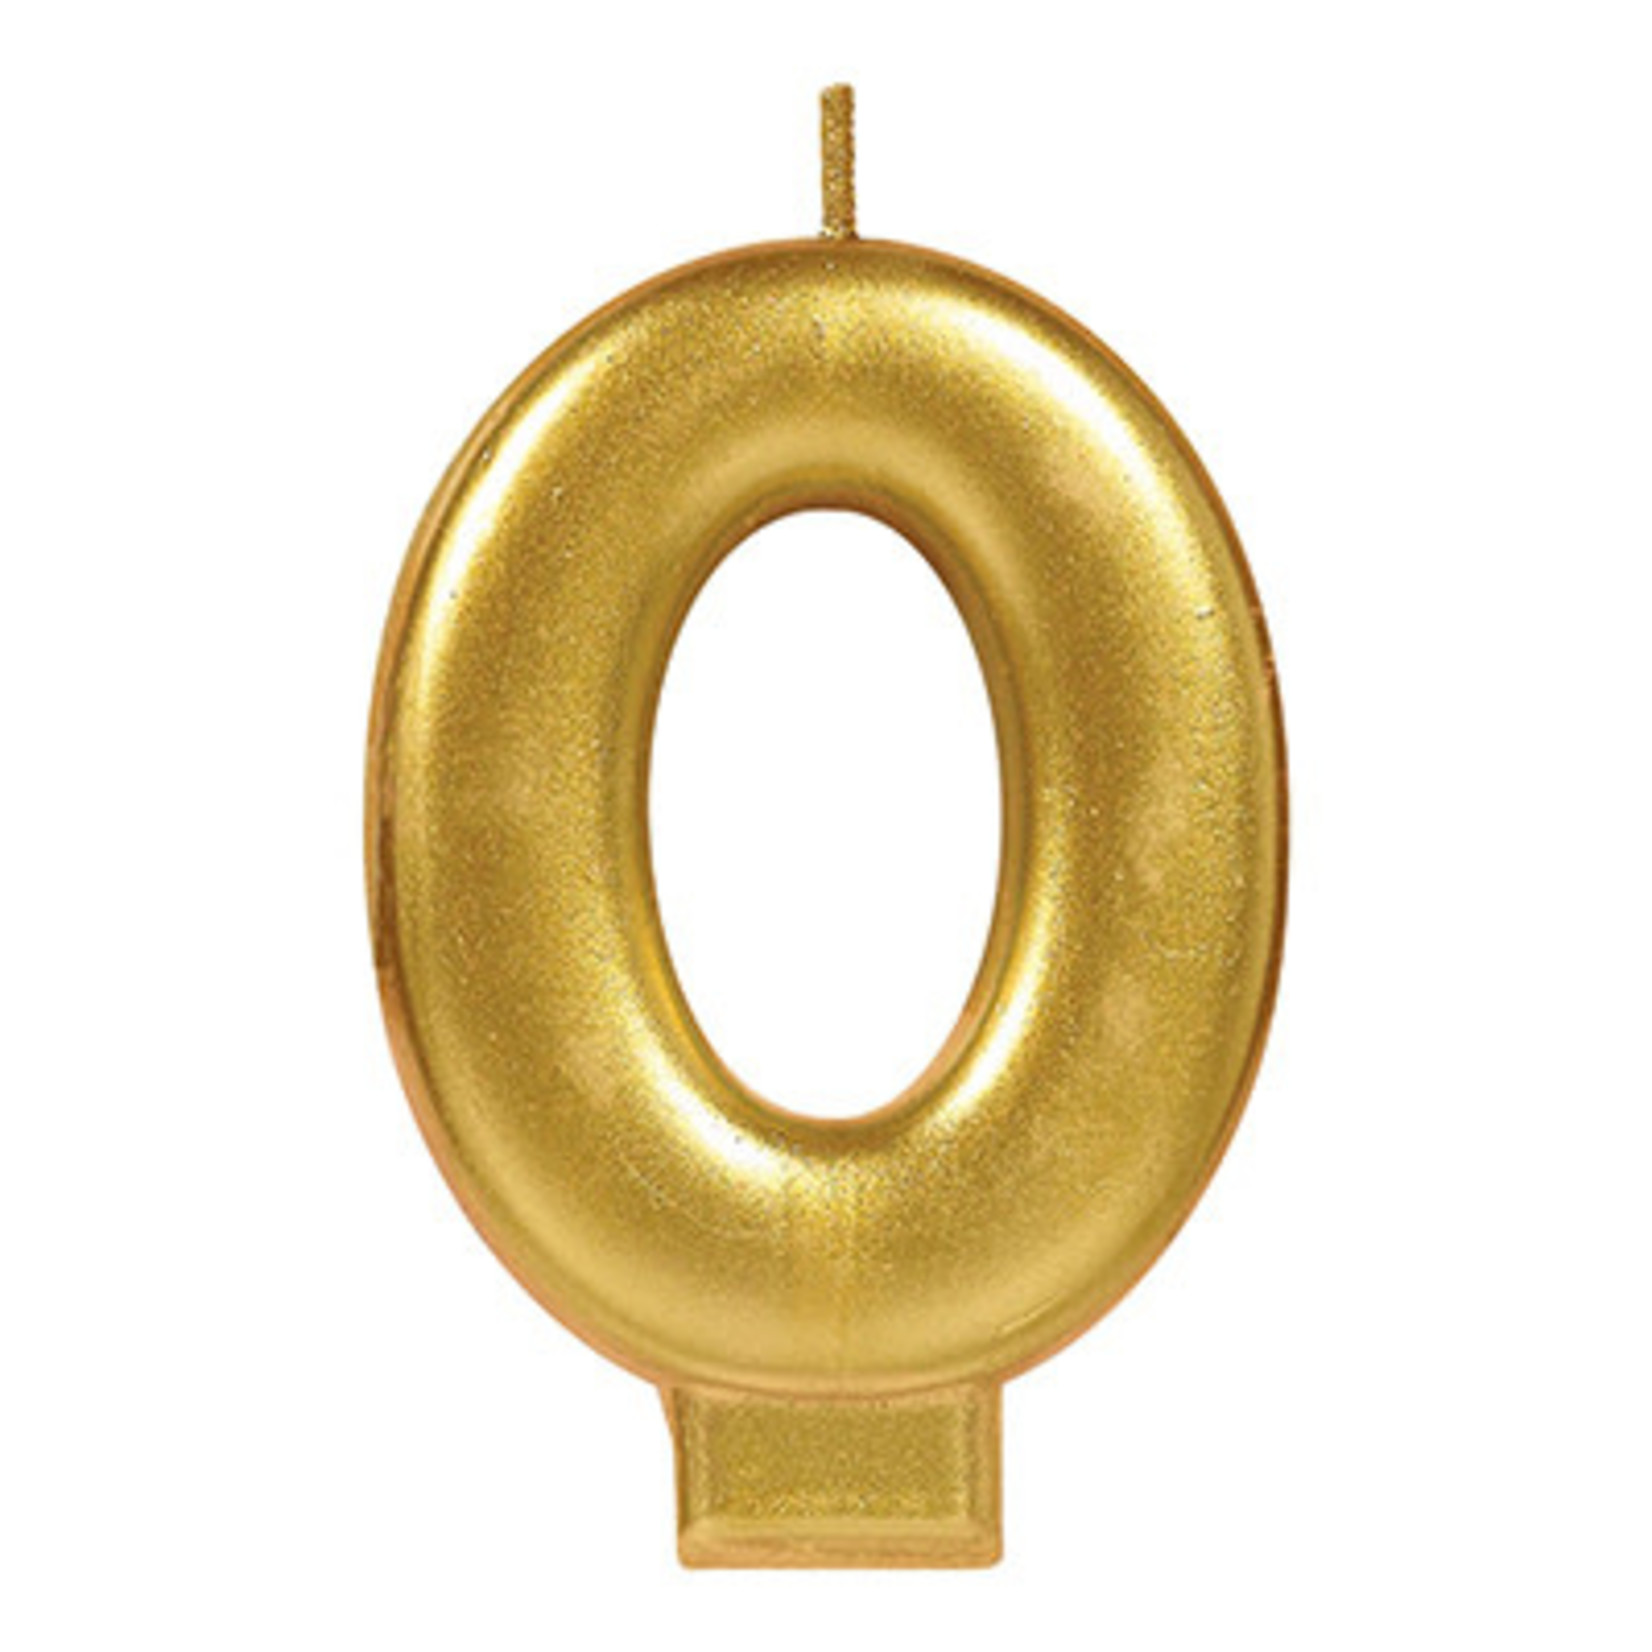 Amscan #0 Metallic Gold Number Candle - 1ct.